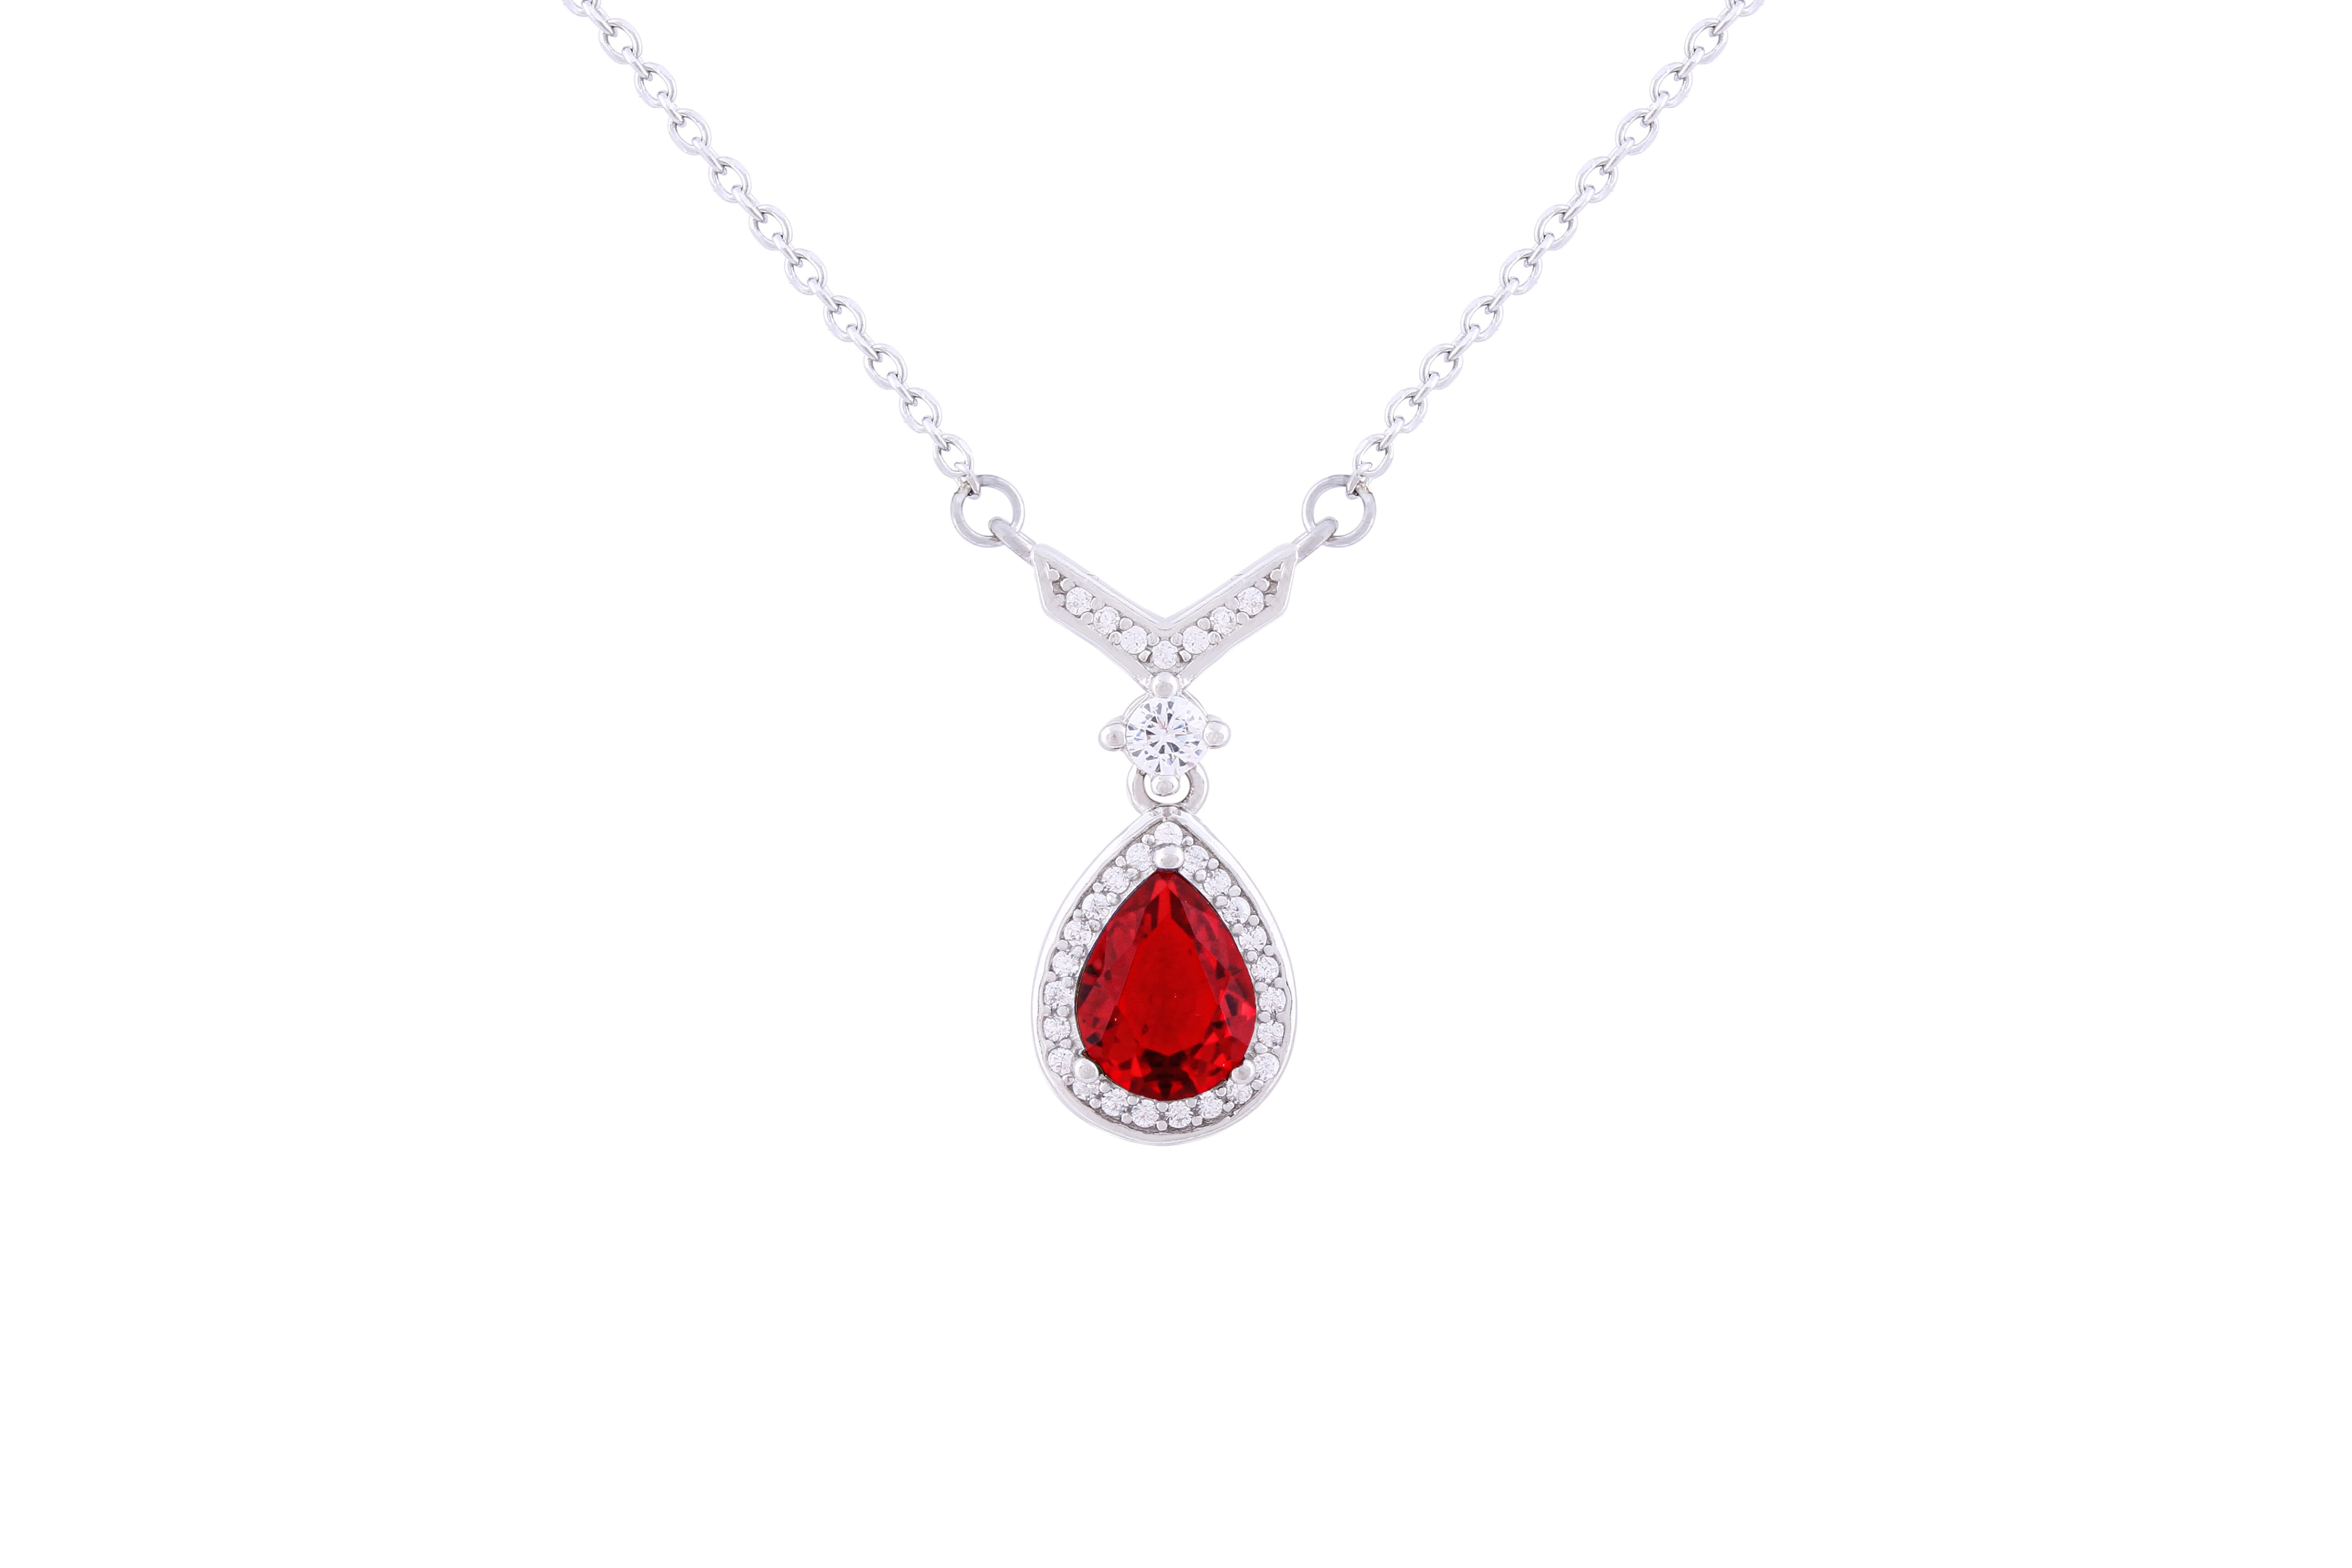 Asfour 925 Sterling Silver Necklace With Red Pear Pendant NR0498-R